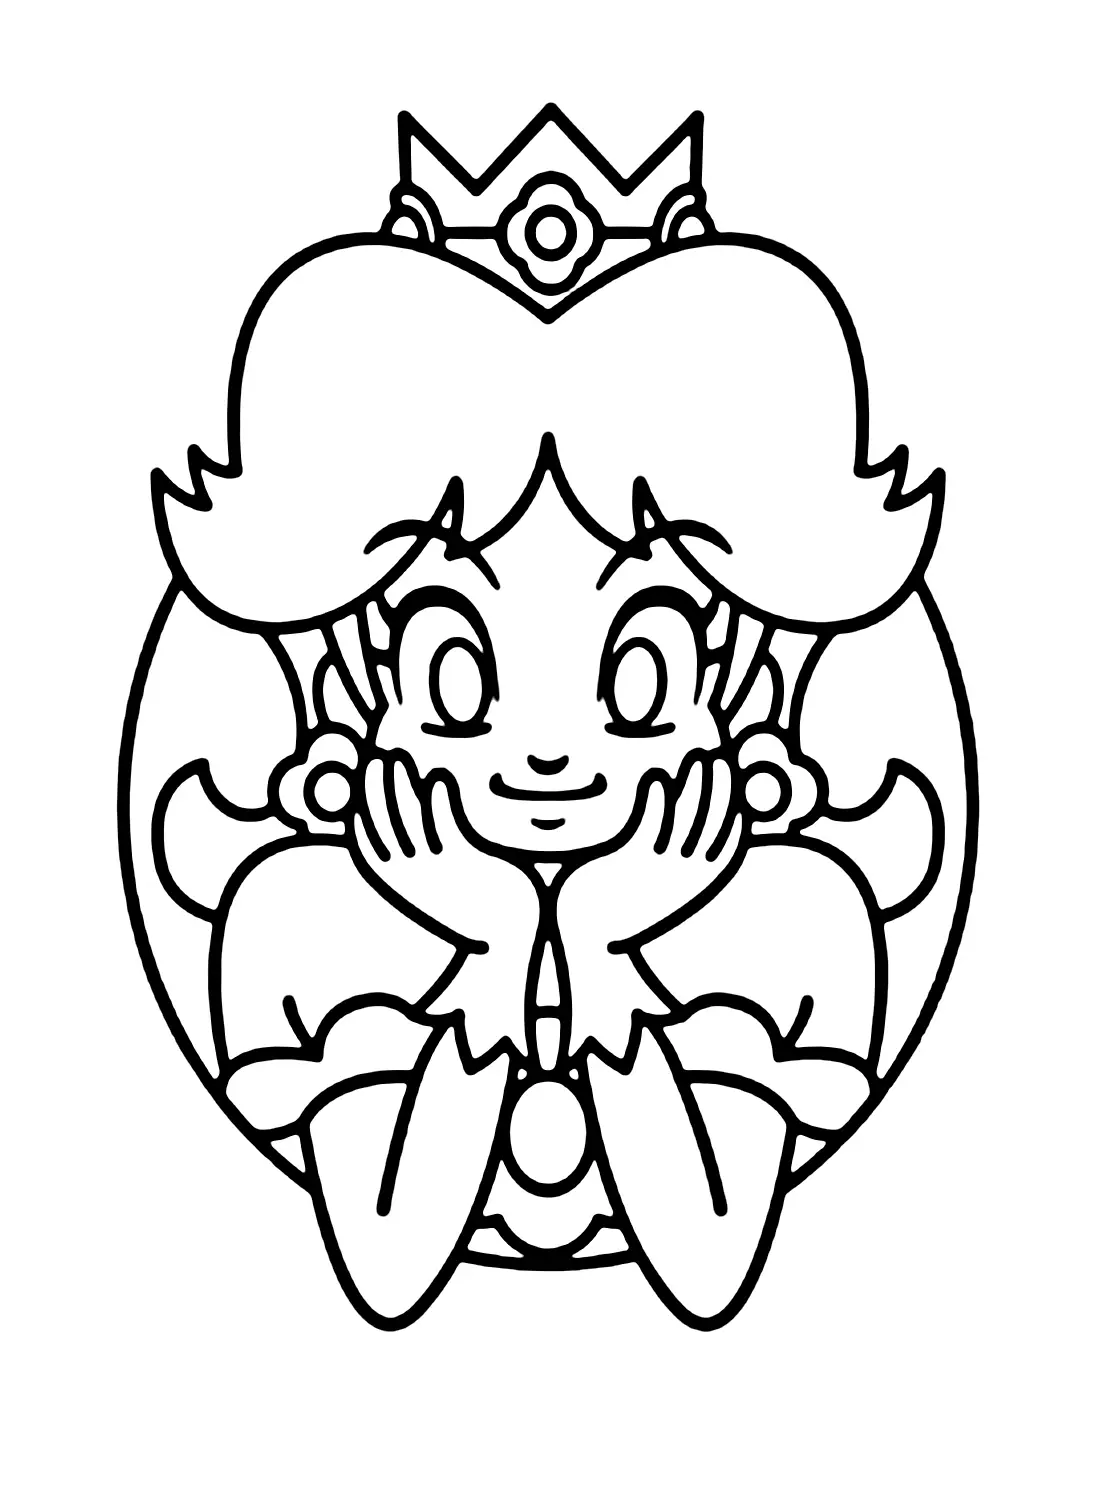 Princess Daisy Coloring Pages